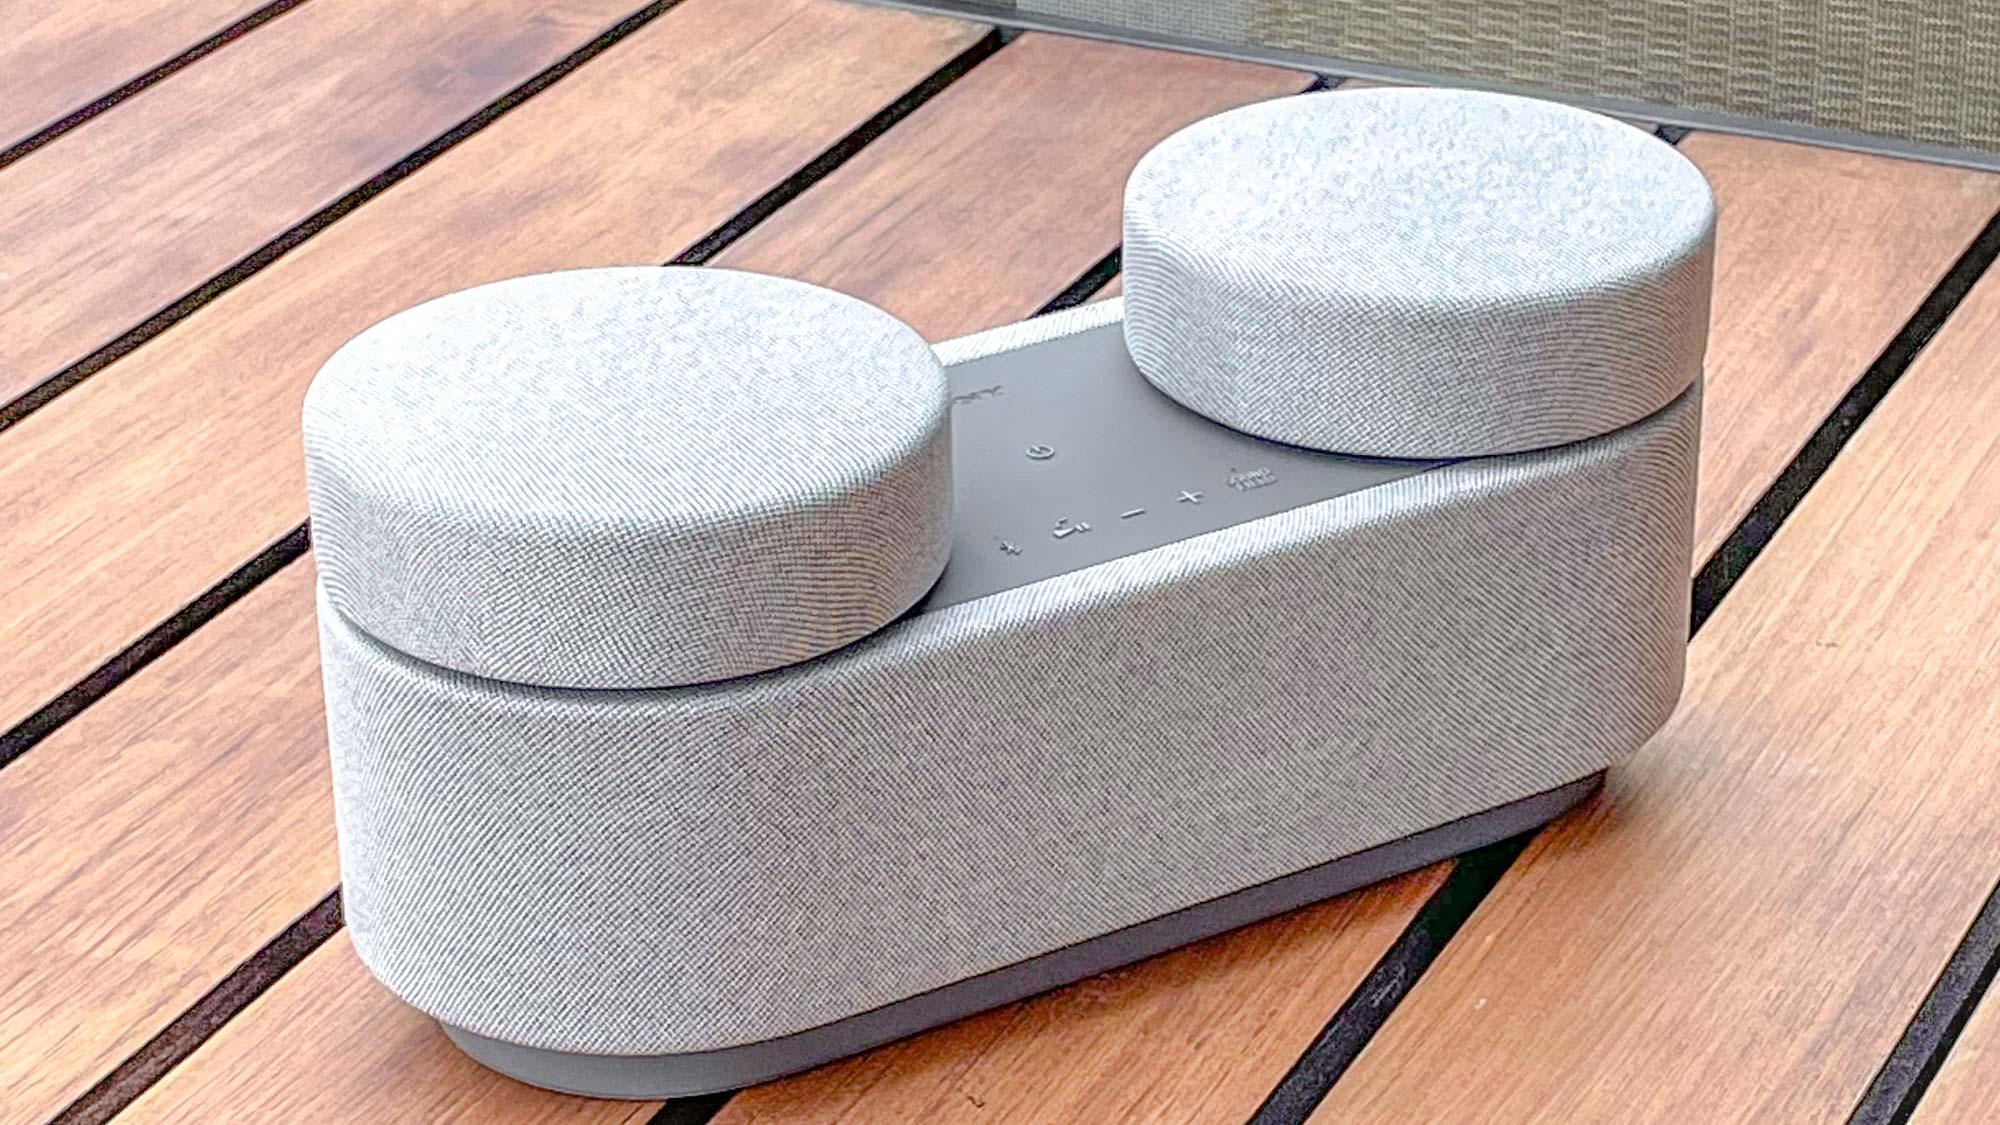 Sony HT-AX7 hands-on: This weird Bluetooth speaker is actually